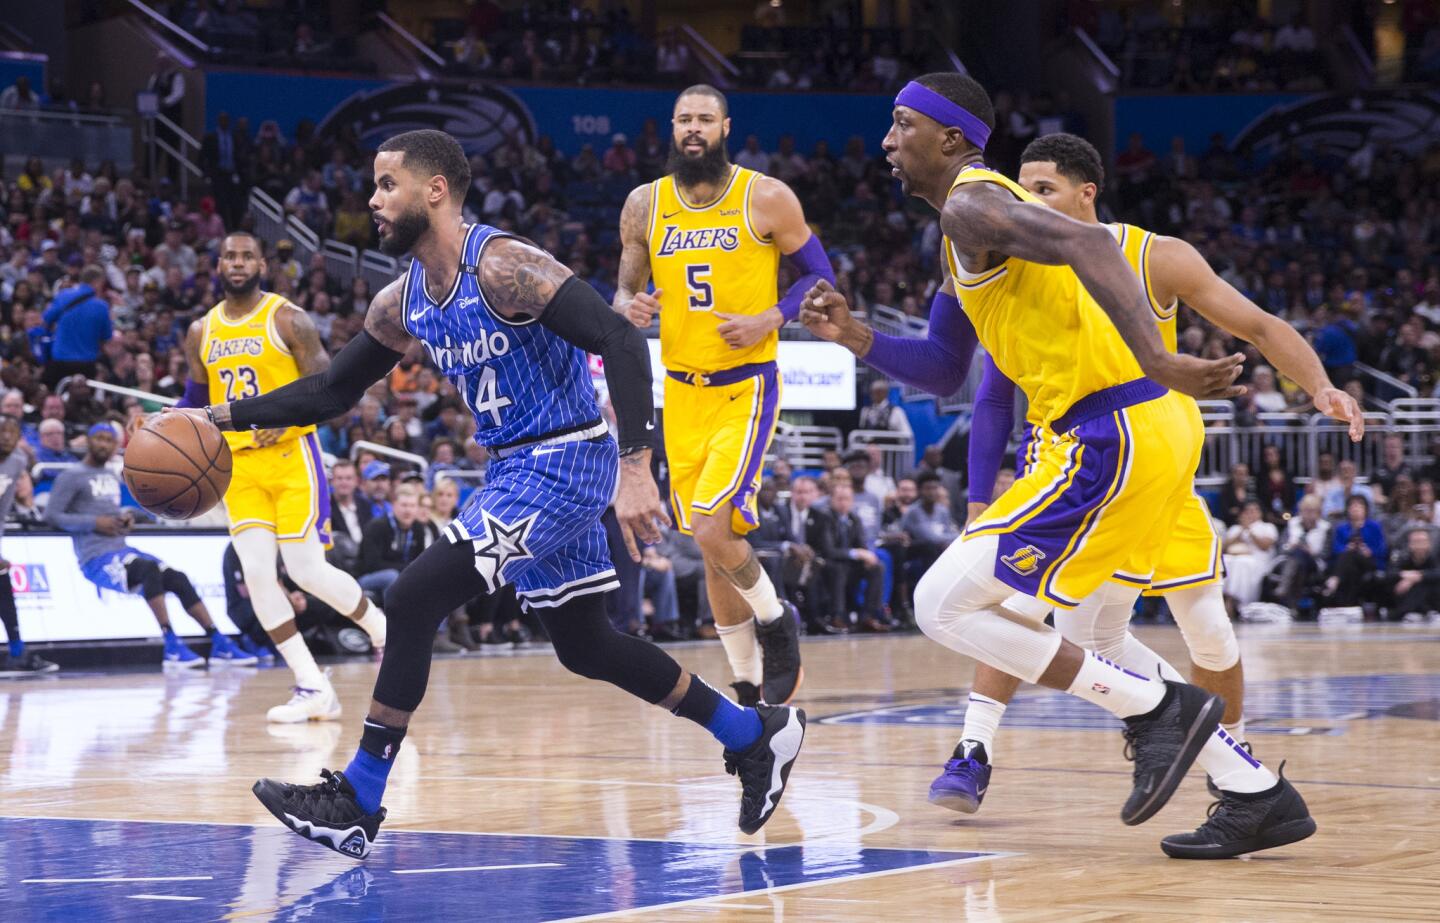 Orlando Magic guard D.J. Augustin (14) dribbled past Los Angeles Lakers guard Kentavious Caldwell-Pope, right, and center Tyson Chandler (5) during the second half of an NBA basketball game, Saturday, Nov. 17, 2018, in Orlando, Fla. The Magic won 130-117. (AP Photo/Willie J. Allen Jr.)